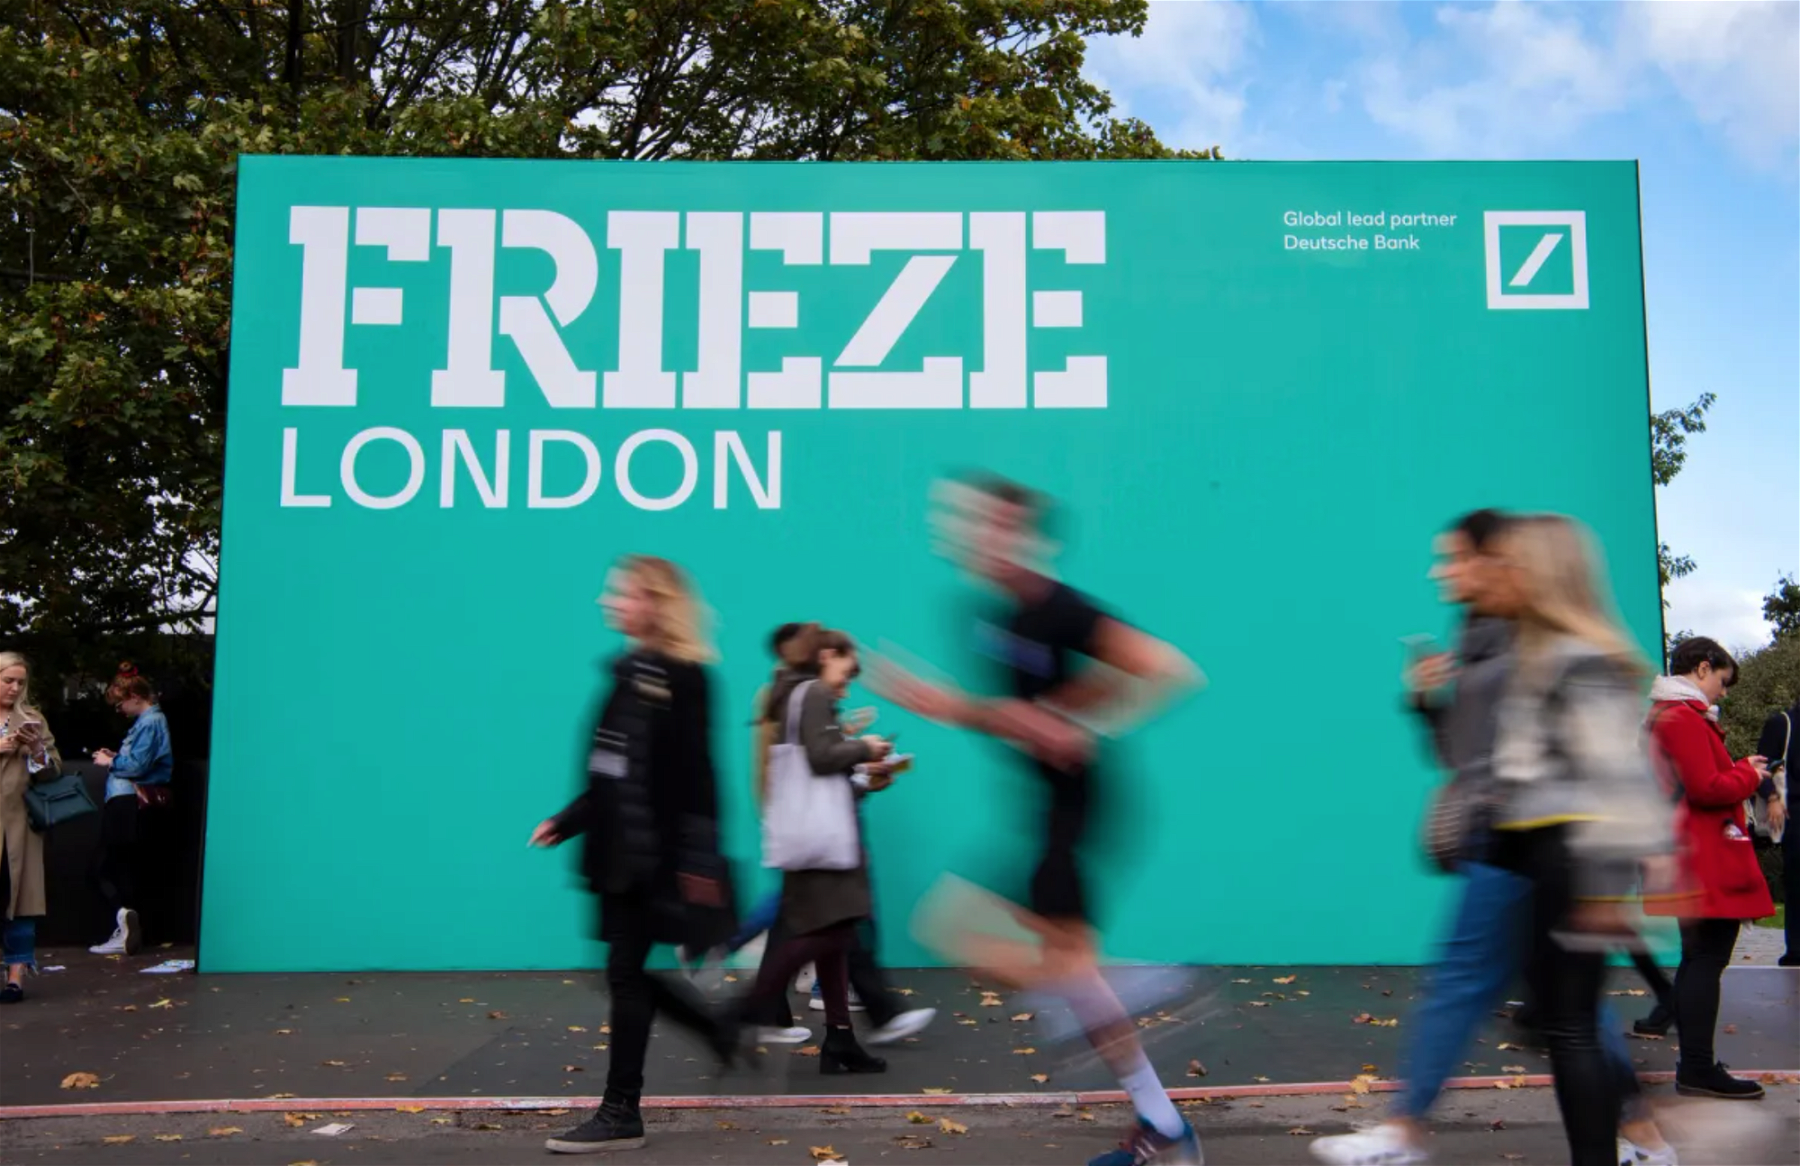 Stepping into Frieze Week